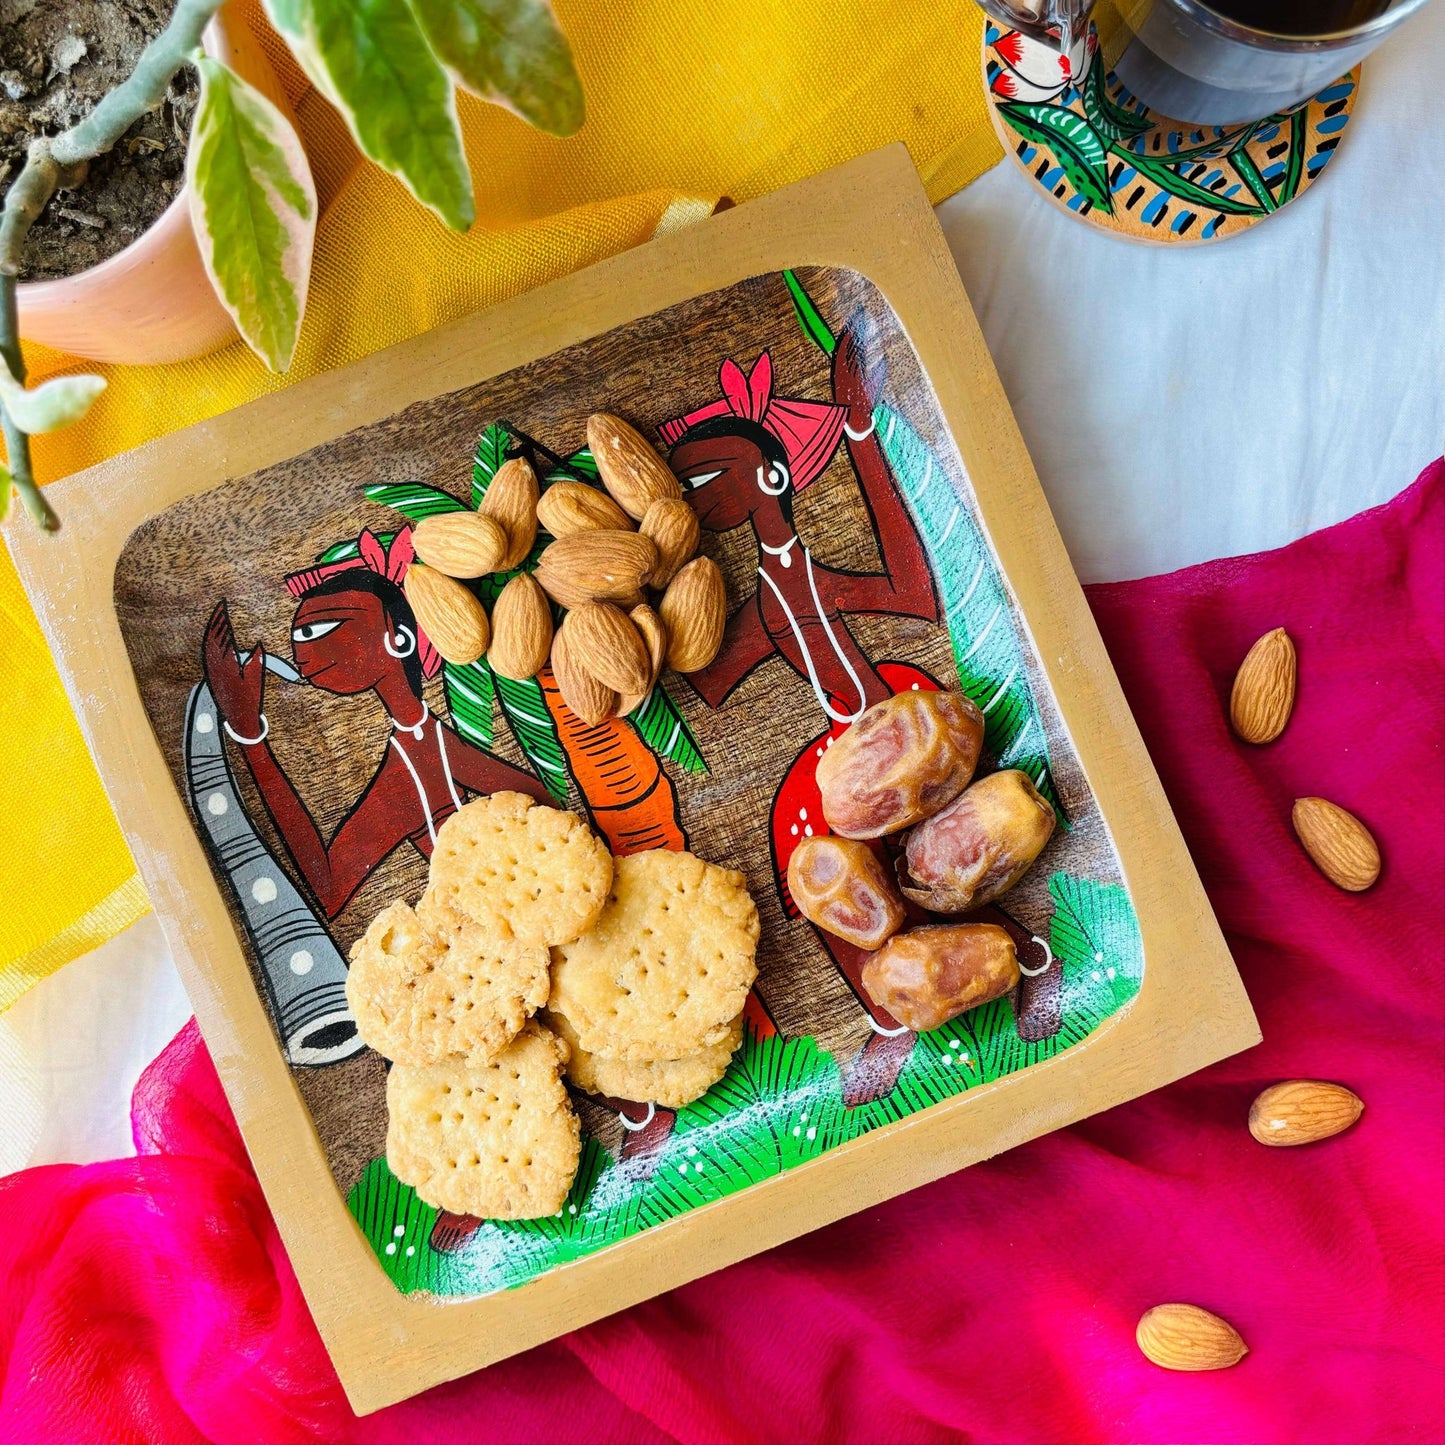 Biscuits, dates and almonds are served in a handcrafted mango wood square wood tray or a trinket tray, painted with tribal motif by generational Pattachitra artists